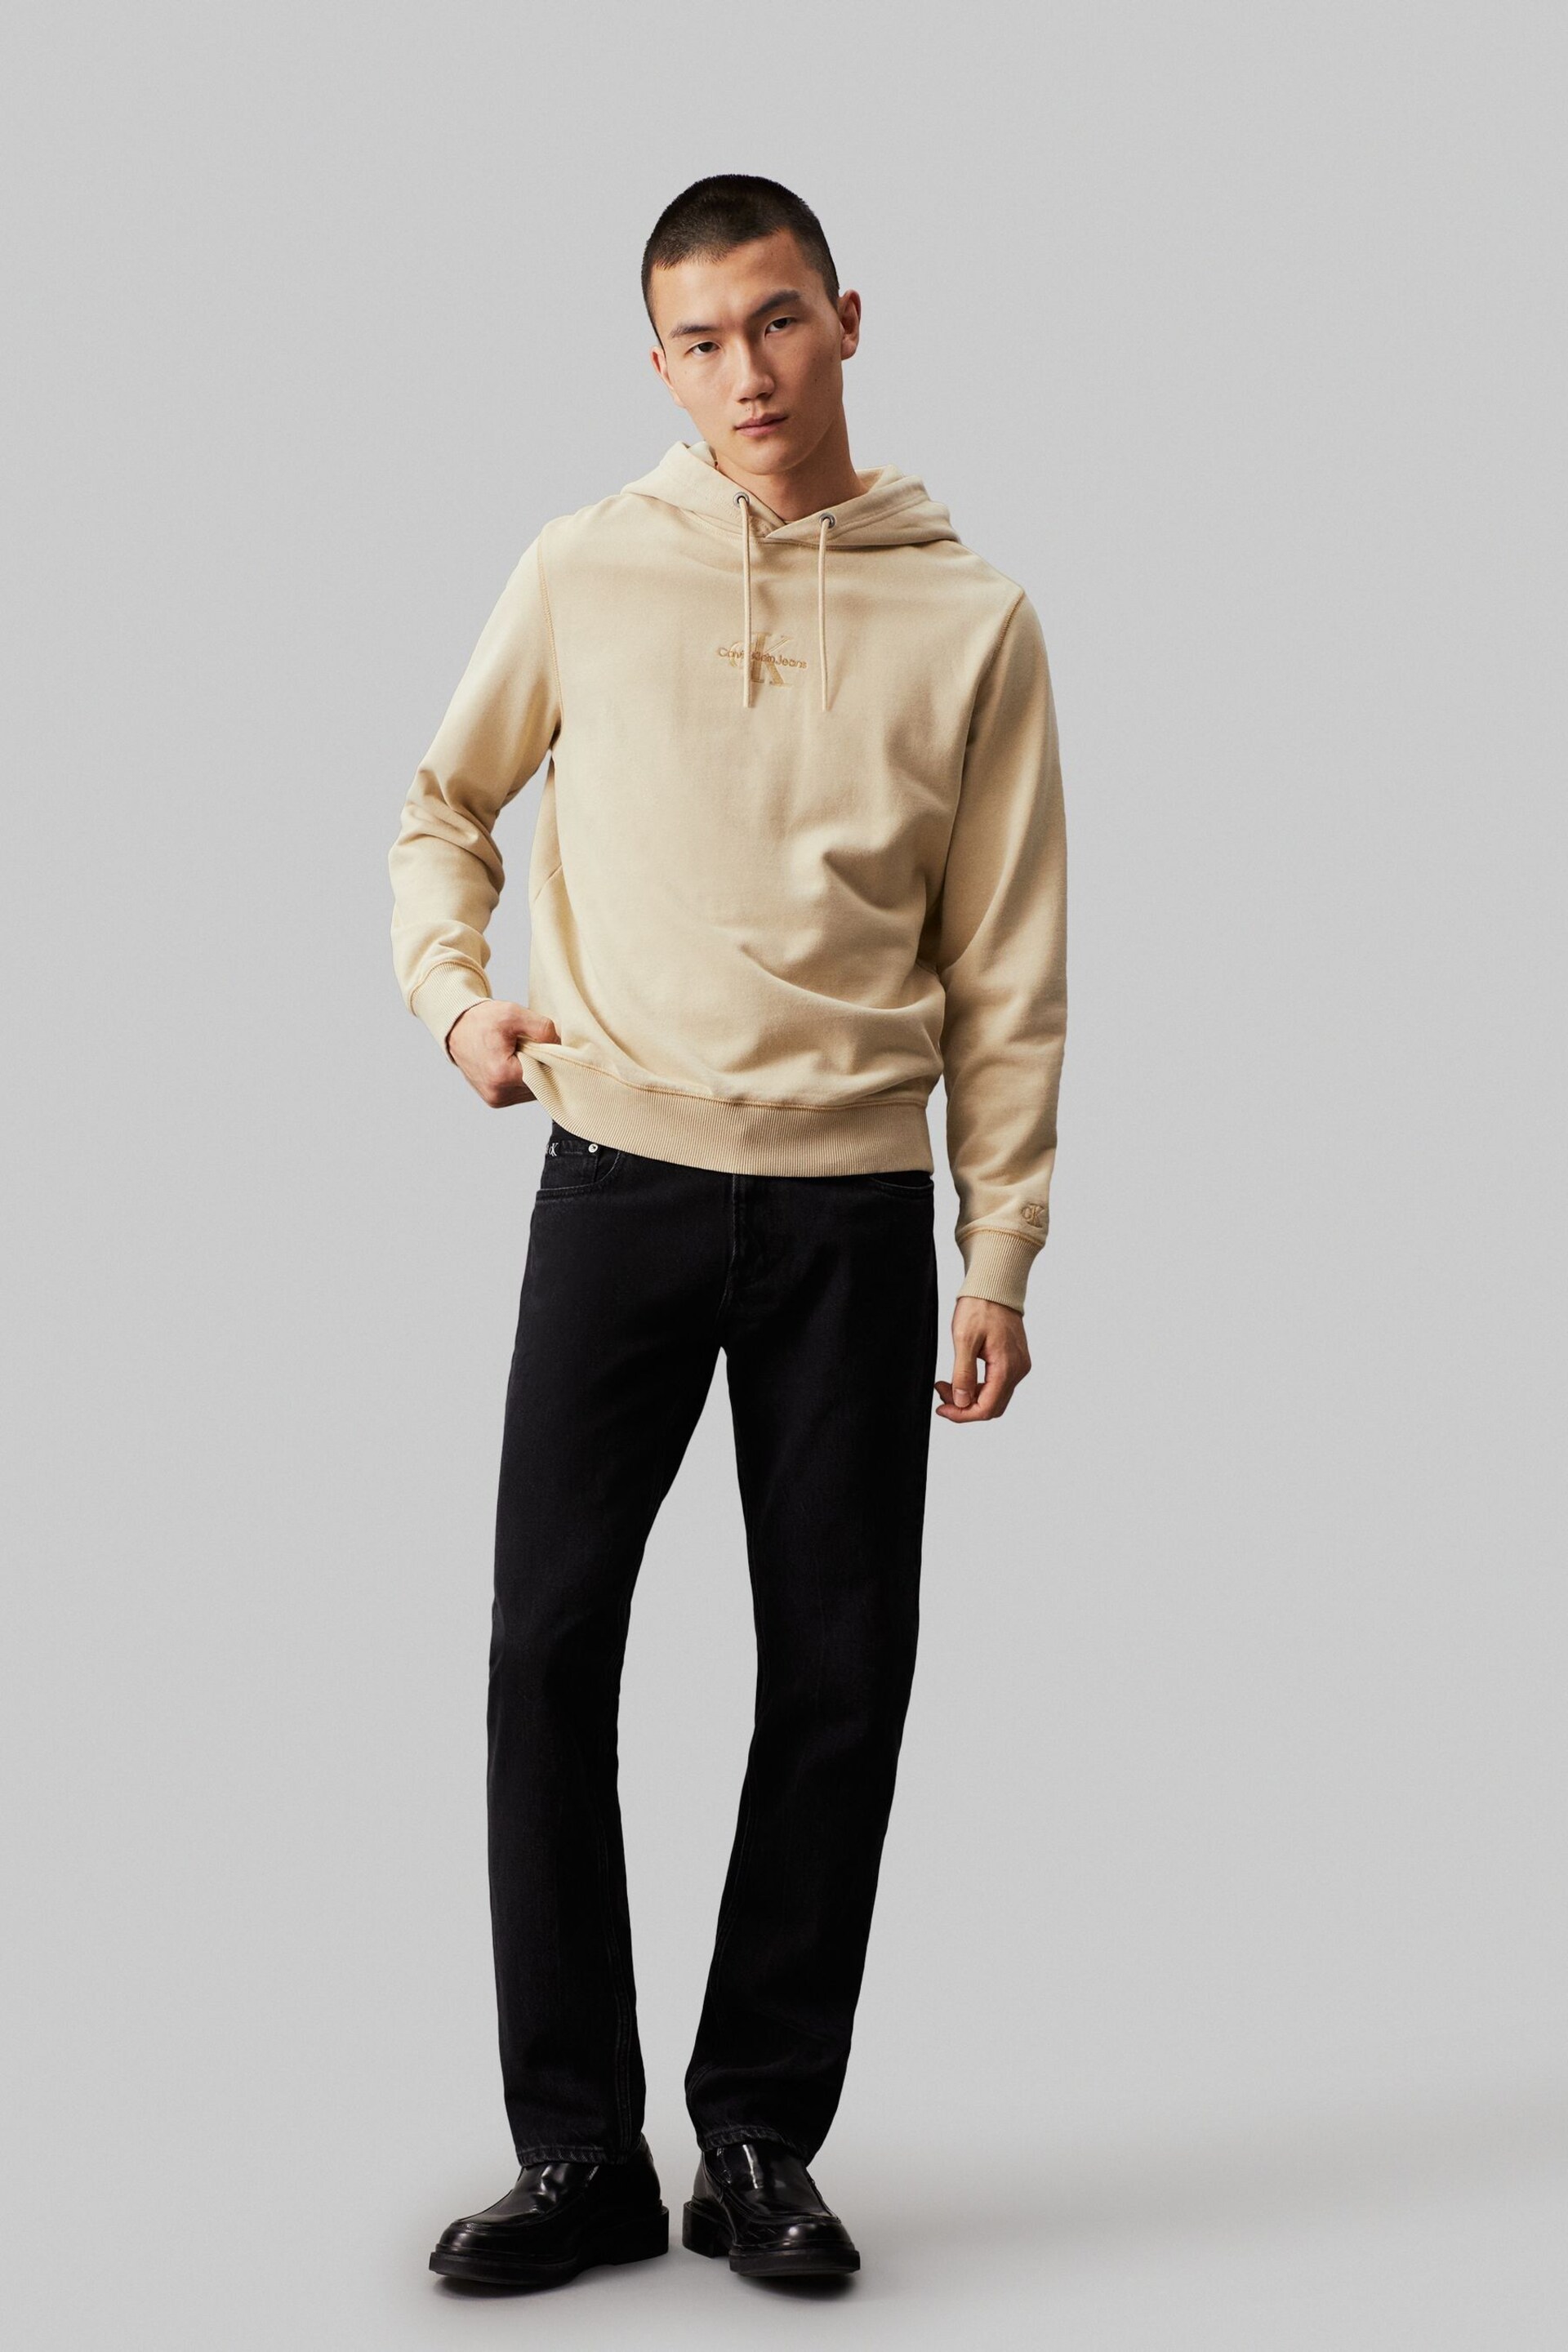 Calvin Klein Jeans Cream Washed Monologo Hoodie - Image 1 of 5